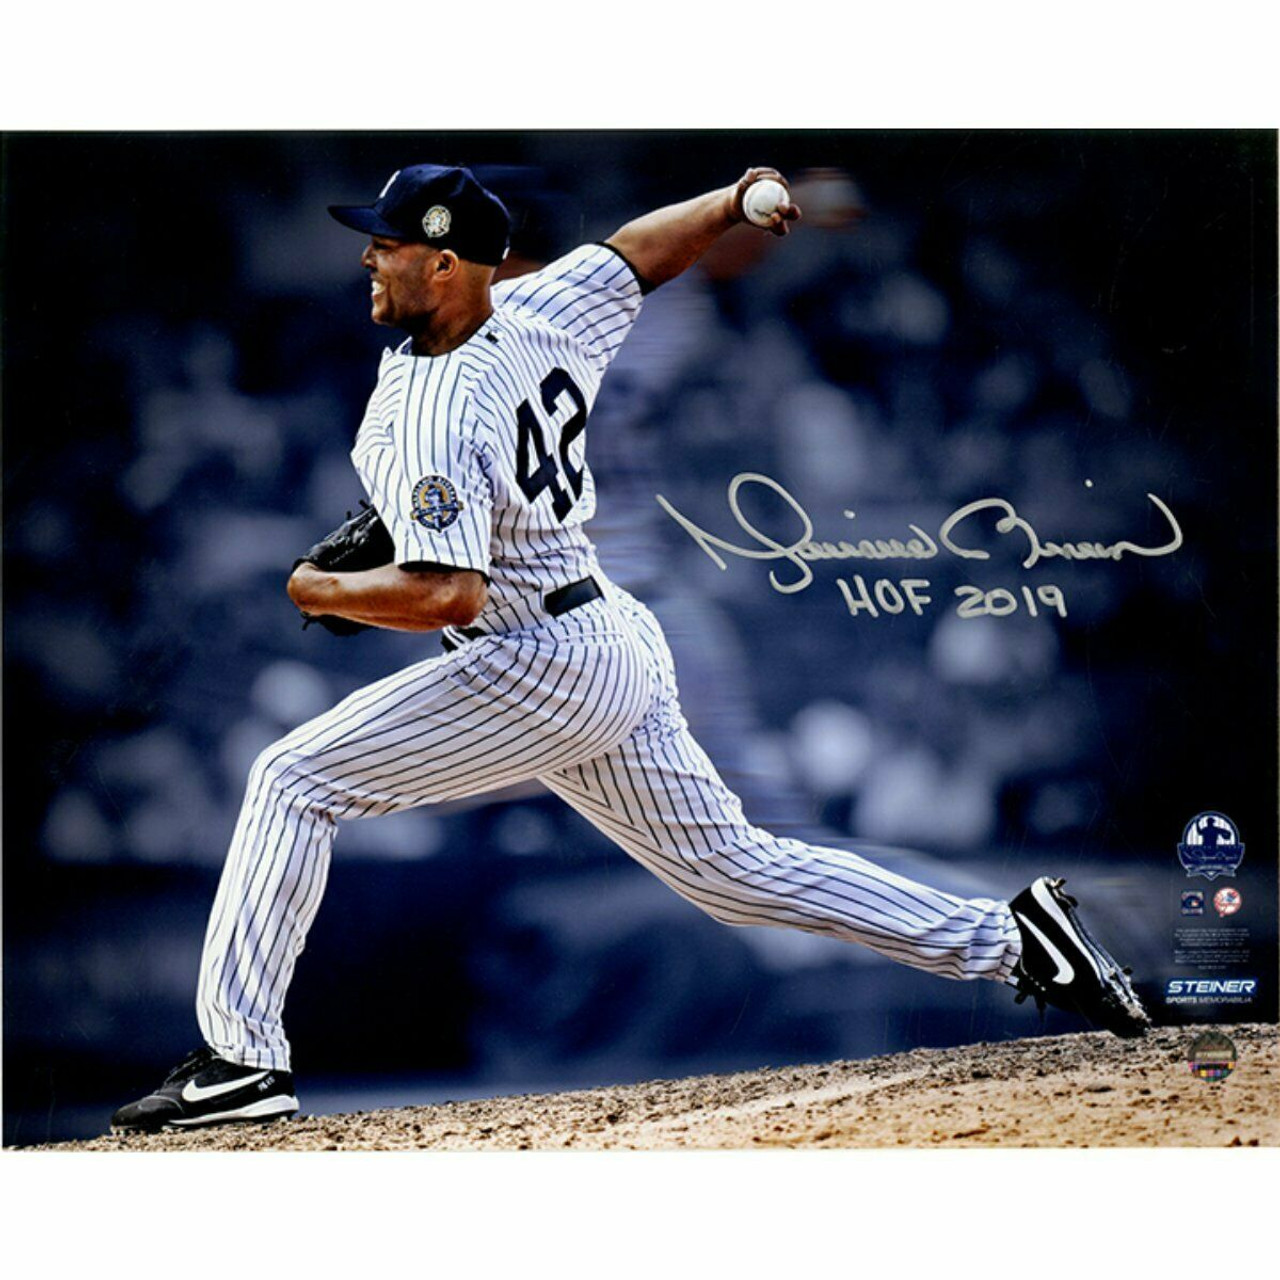 New York Yankees legend Mariano Rivera's Hall of Fame case